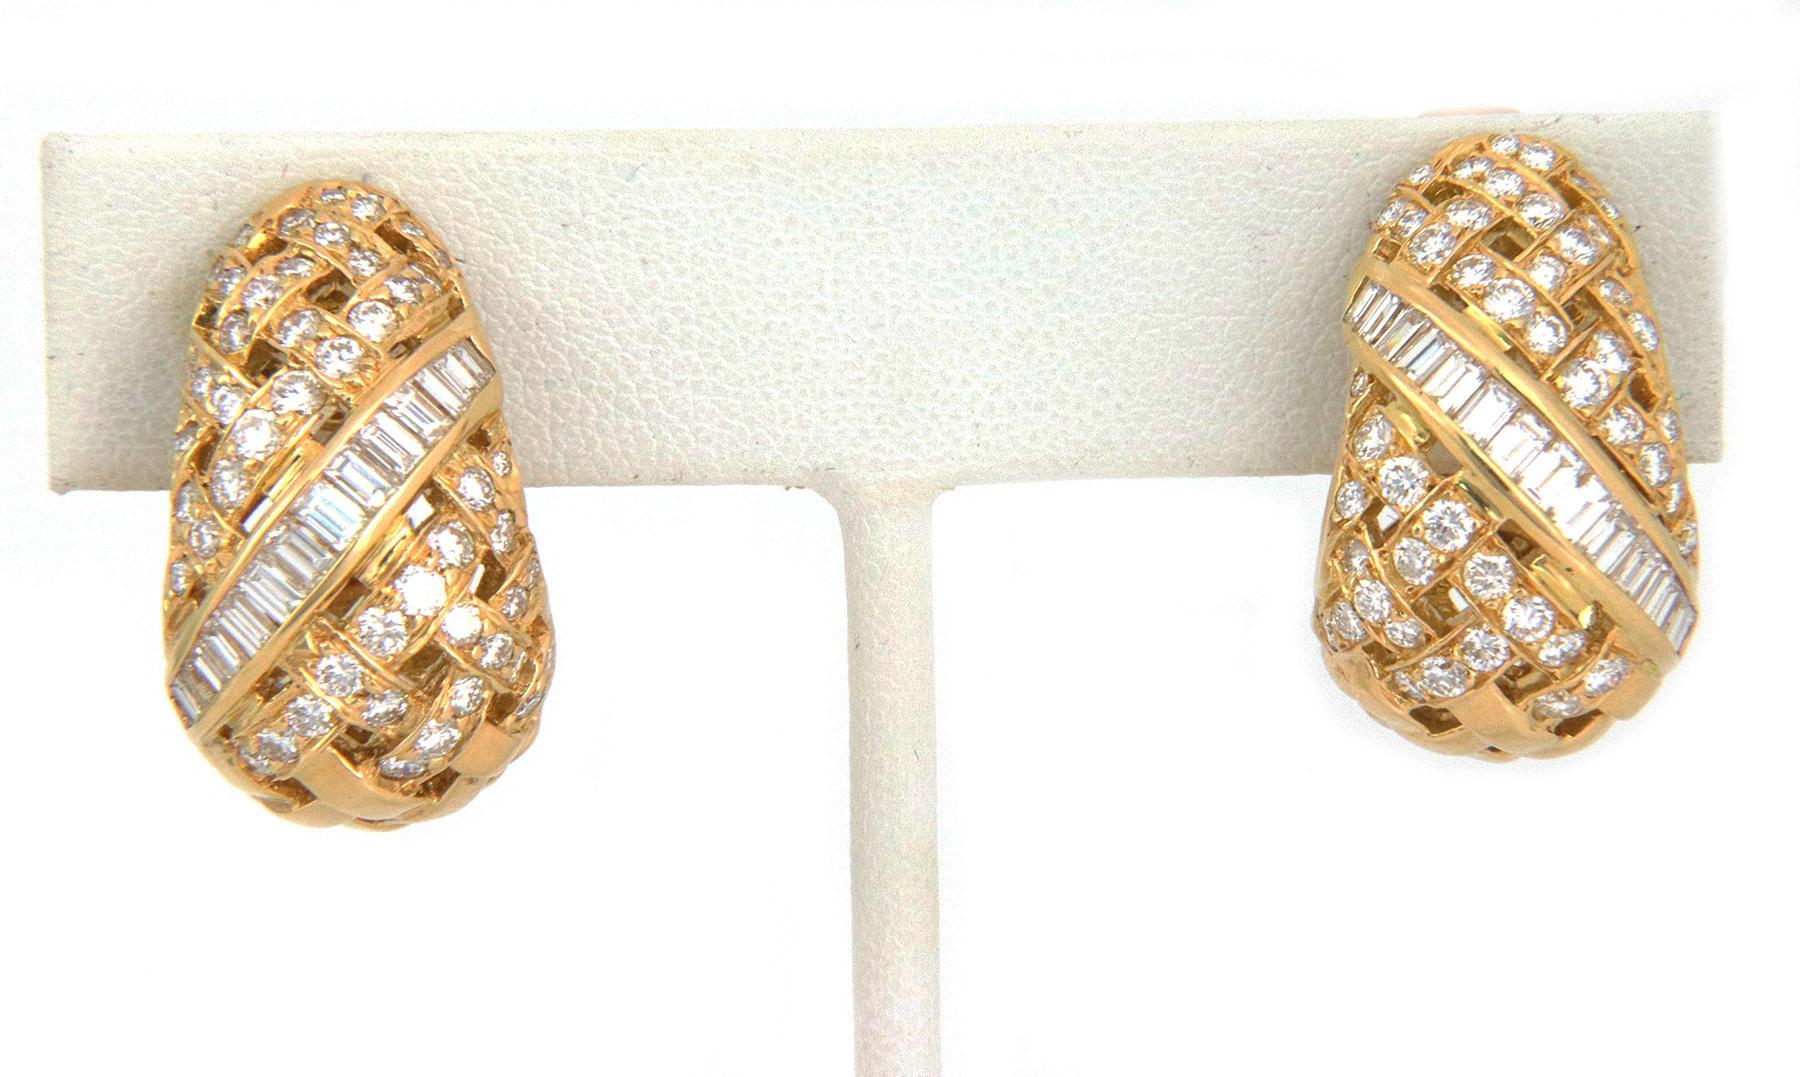 Tiffany & Co. Vannerie Collection pair of huggies earrings are crafted from 18k yellow gold featuring a tapered dome bottom style with the basket weave design, the top and lower part of on the front has round cut diamonds along the strips and the